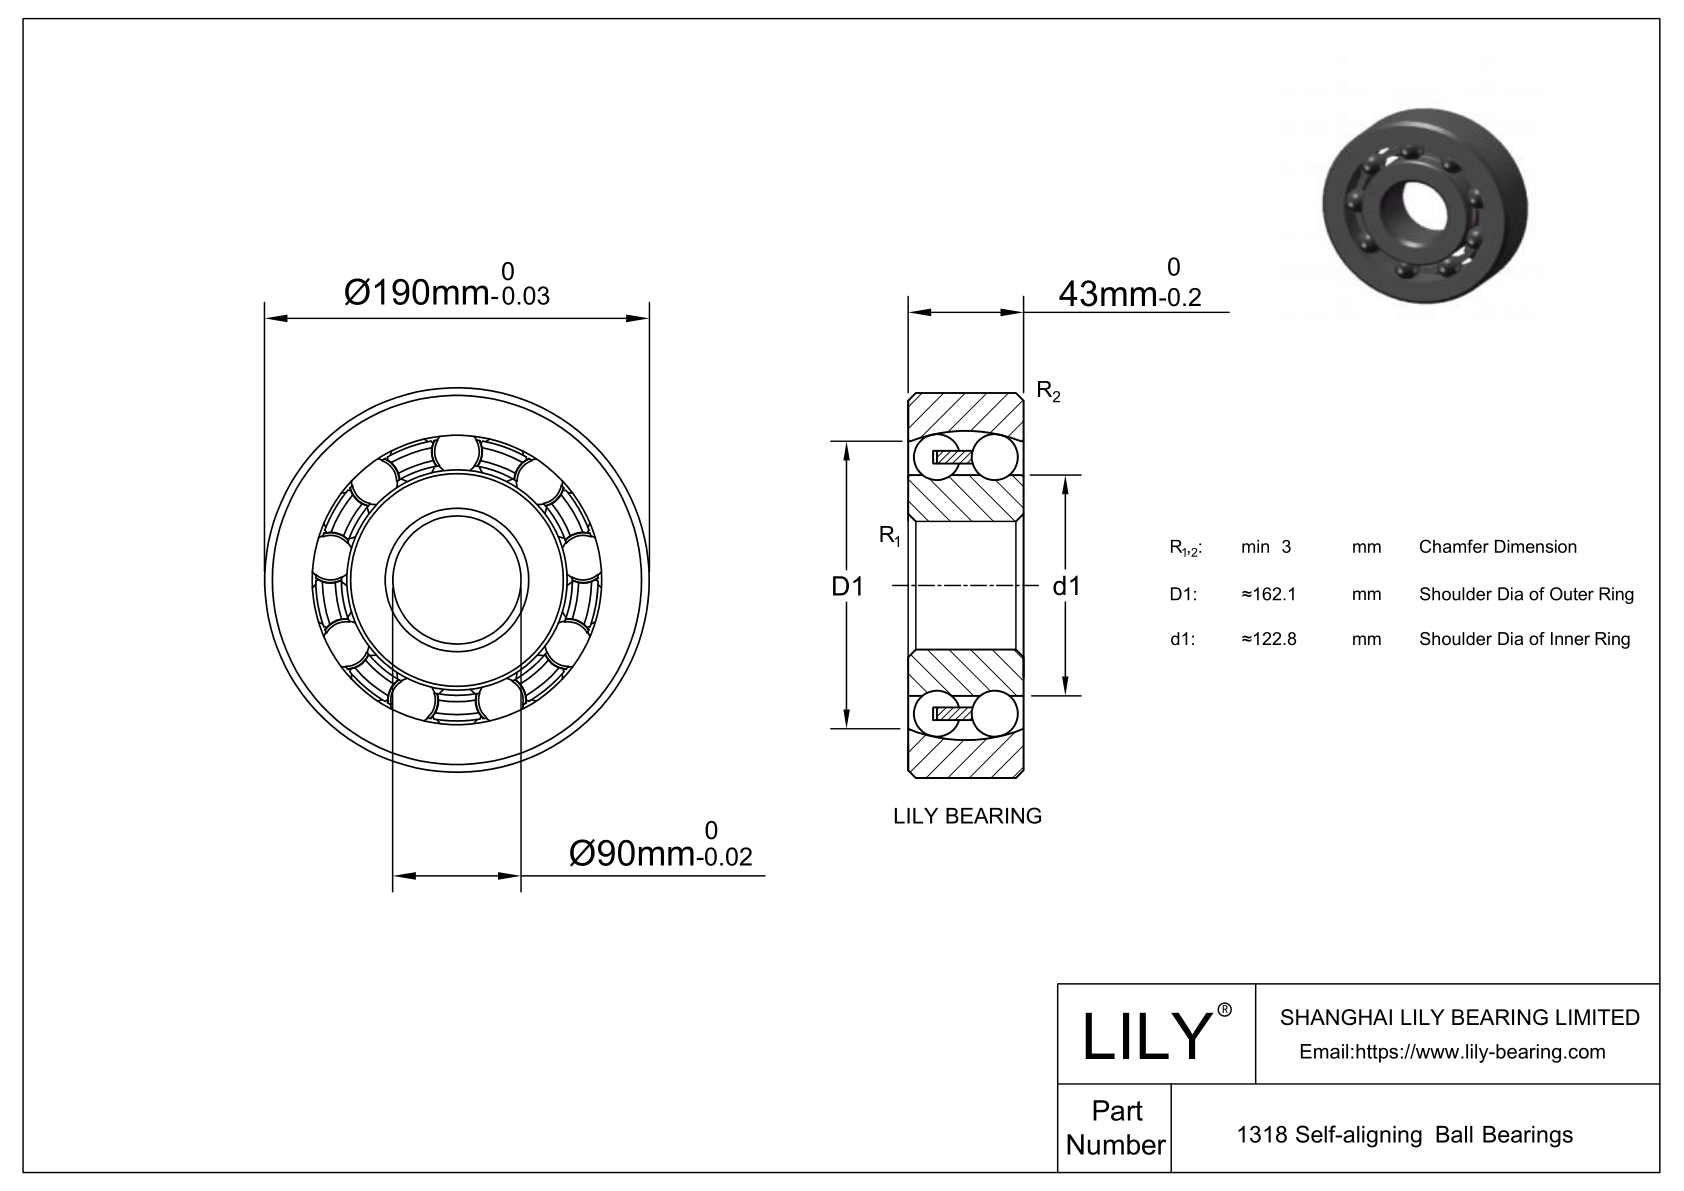 S1318 Stainless Steel Self Aligning Ball Bearings cad drawing